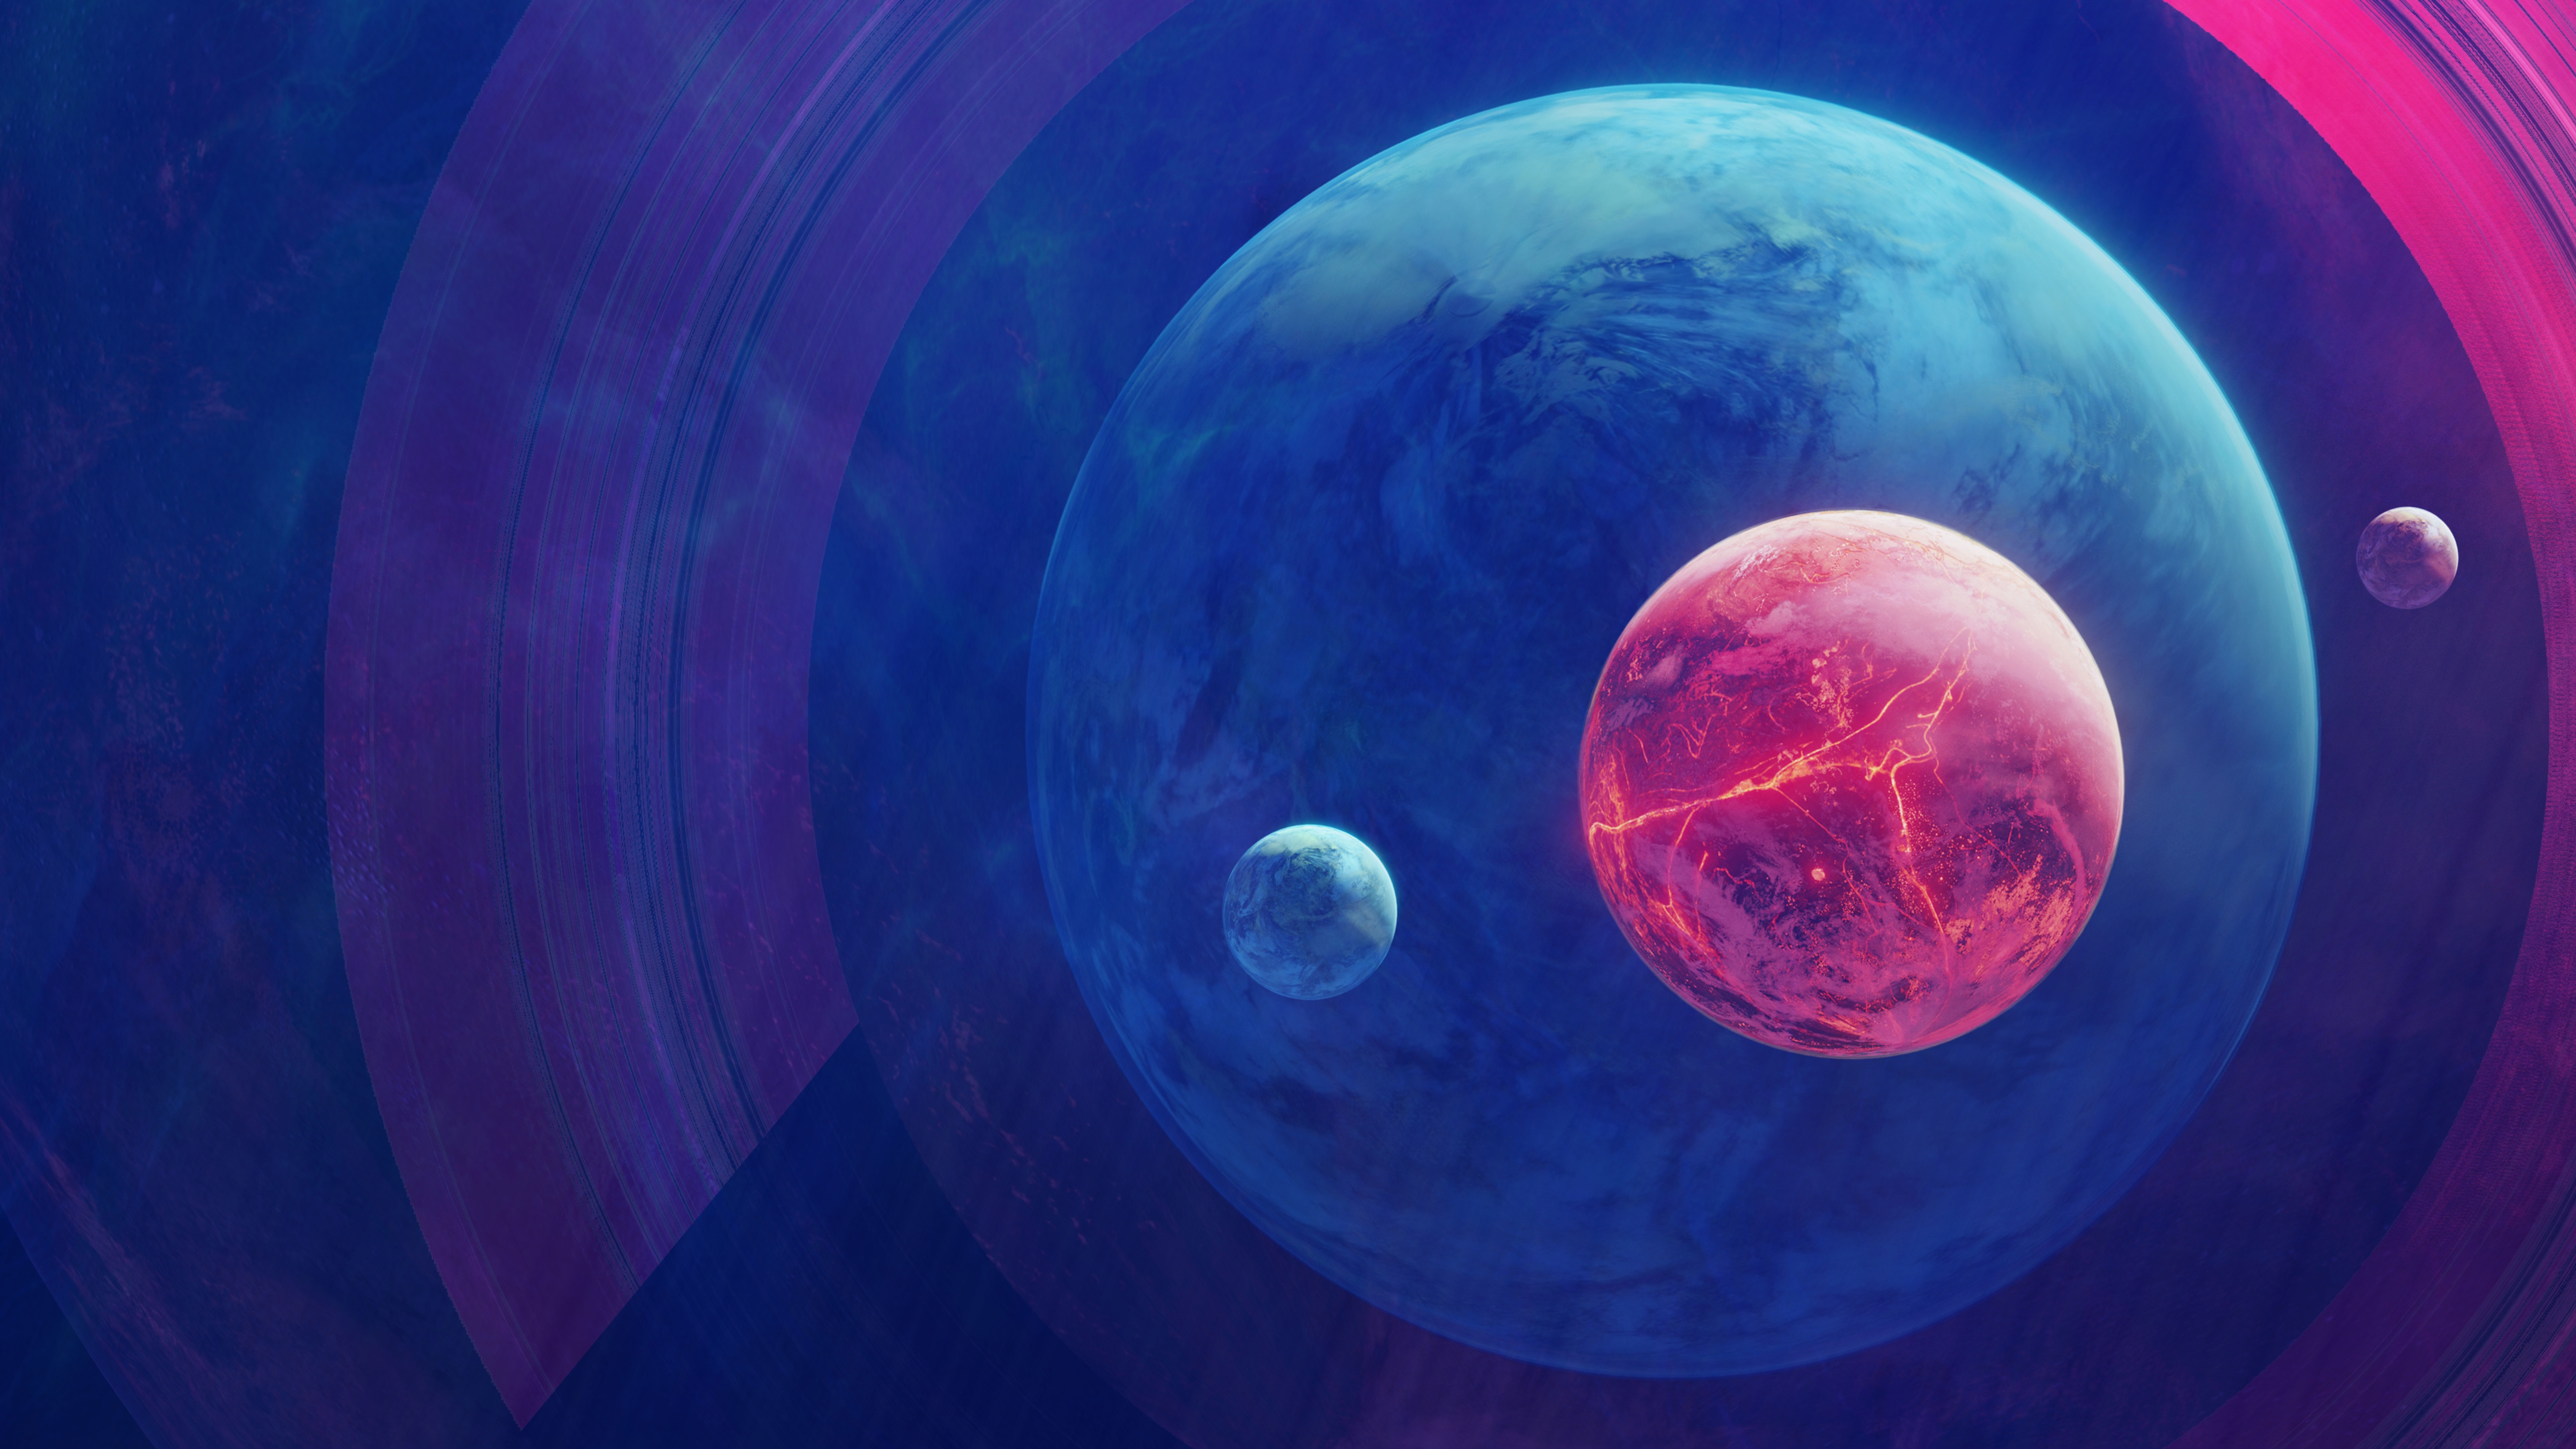 General 7680x4320 space planet Moon galaxy